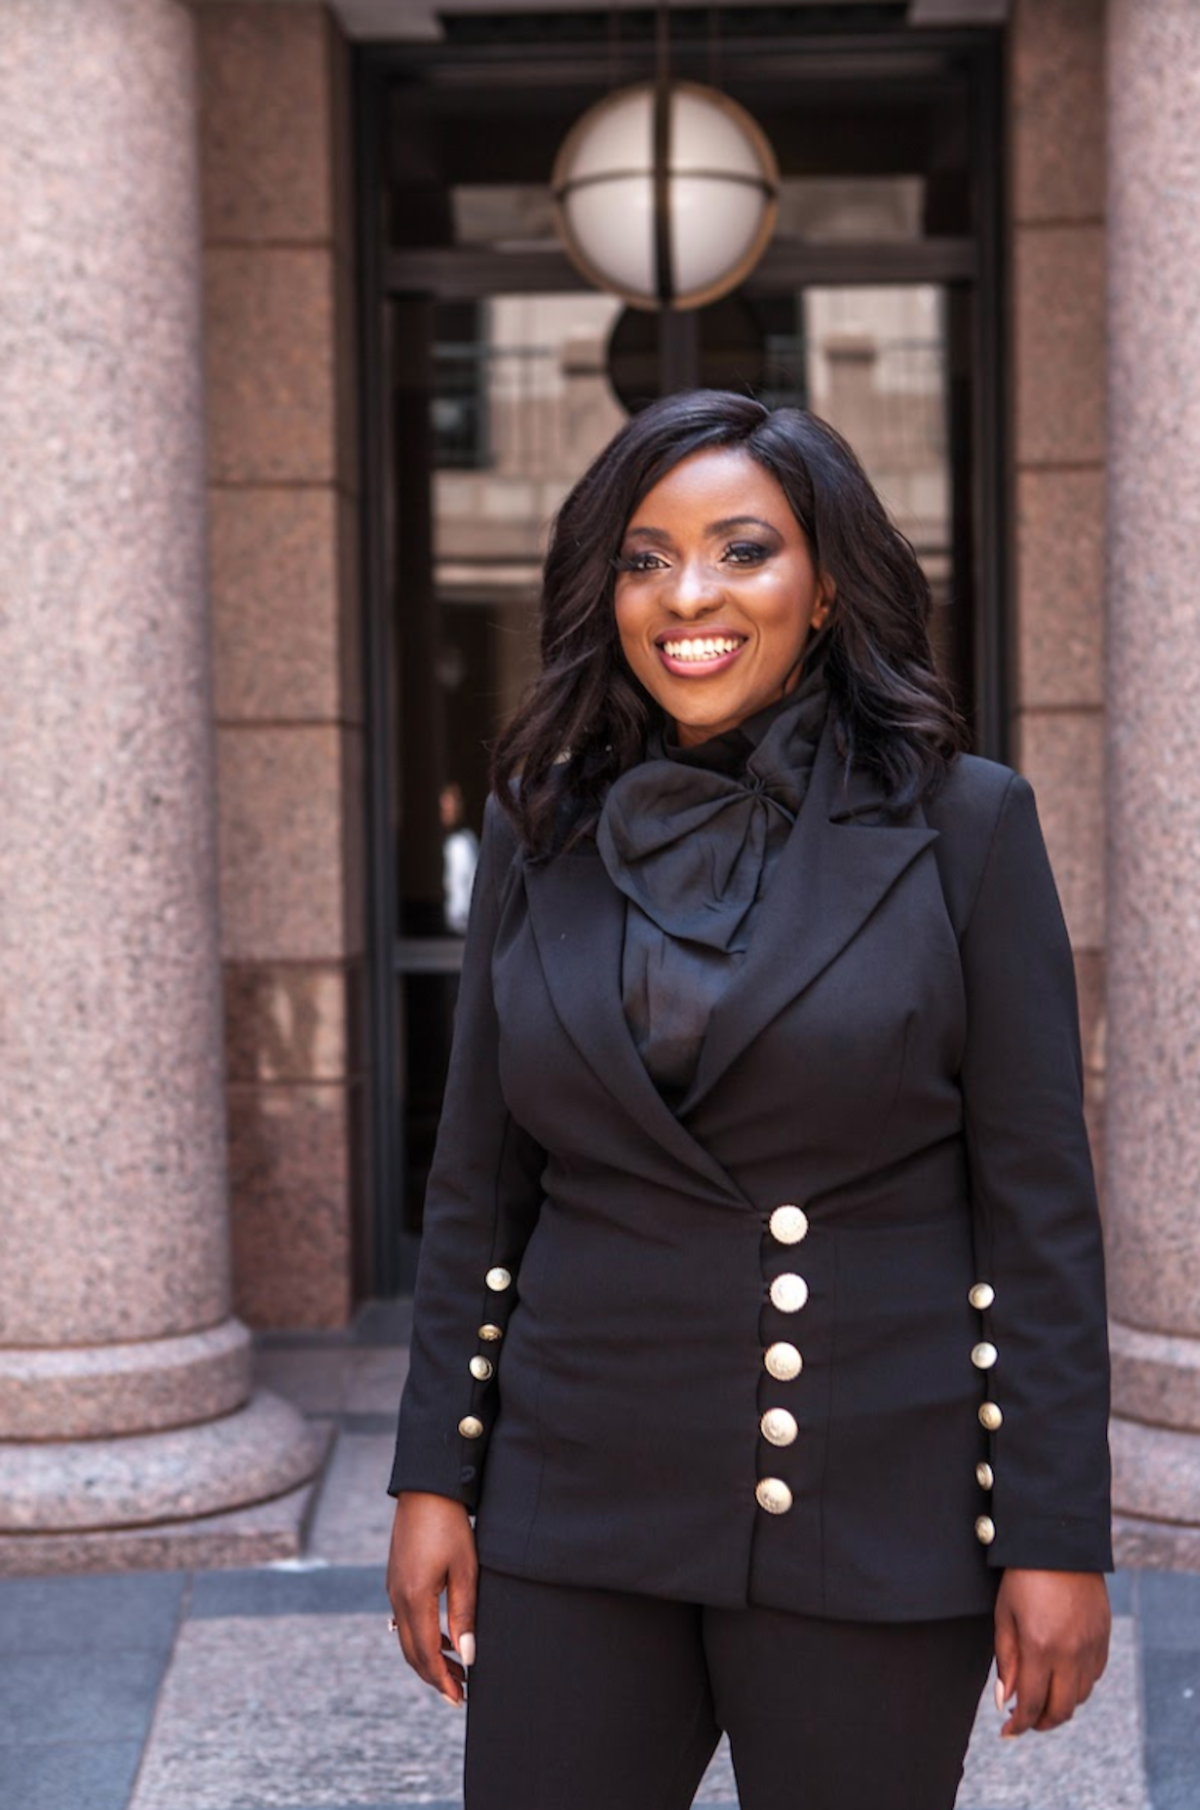 Civil Rights Attorney Jasmine Crockett Is Making Waves As A Texas State Representative Darling